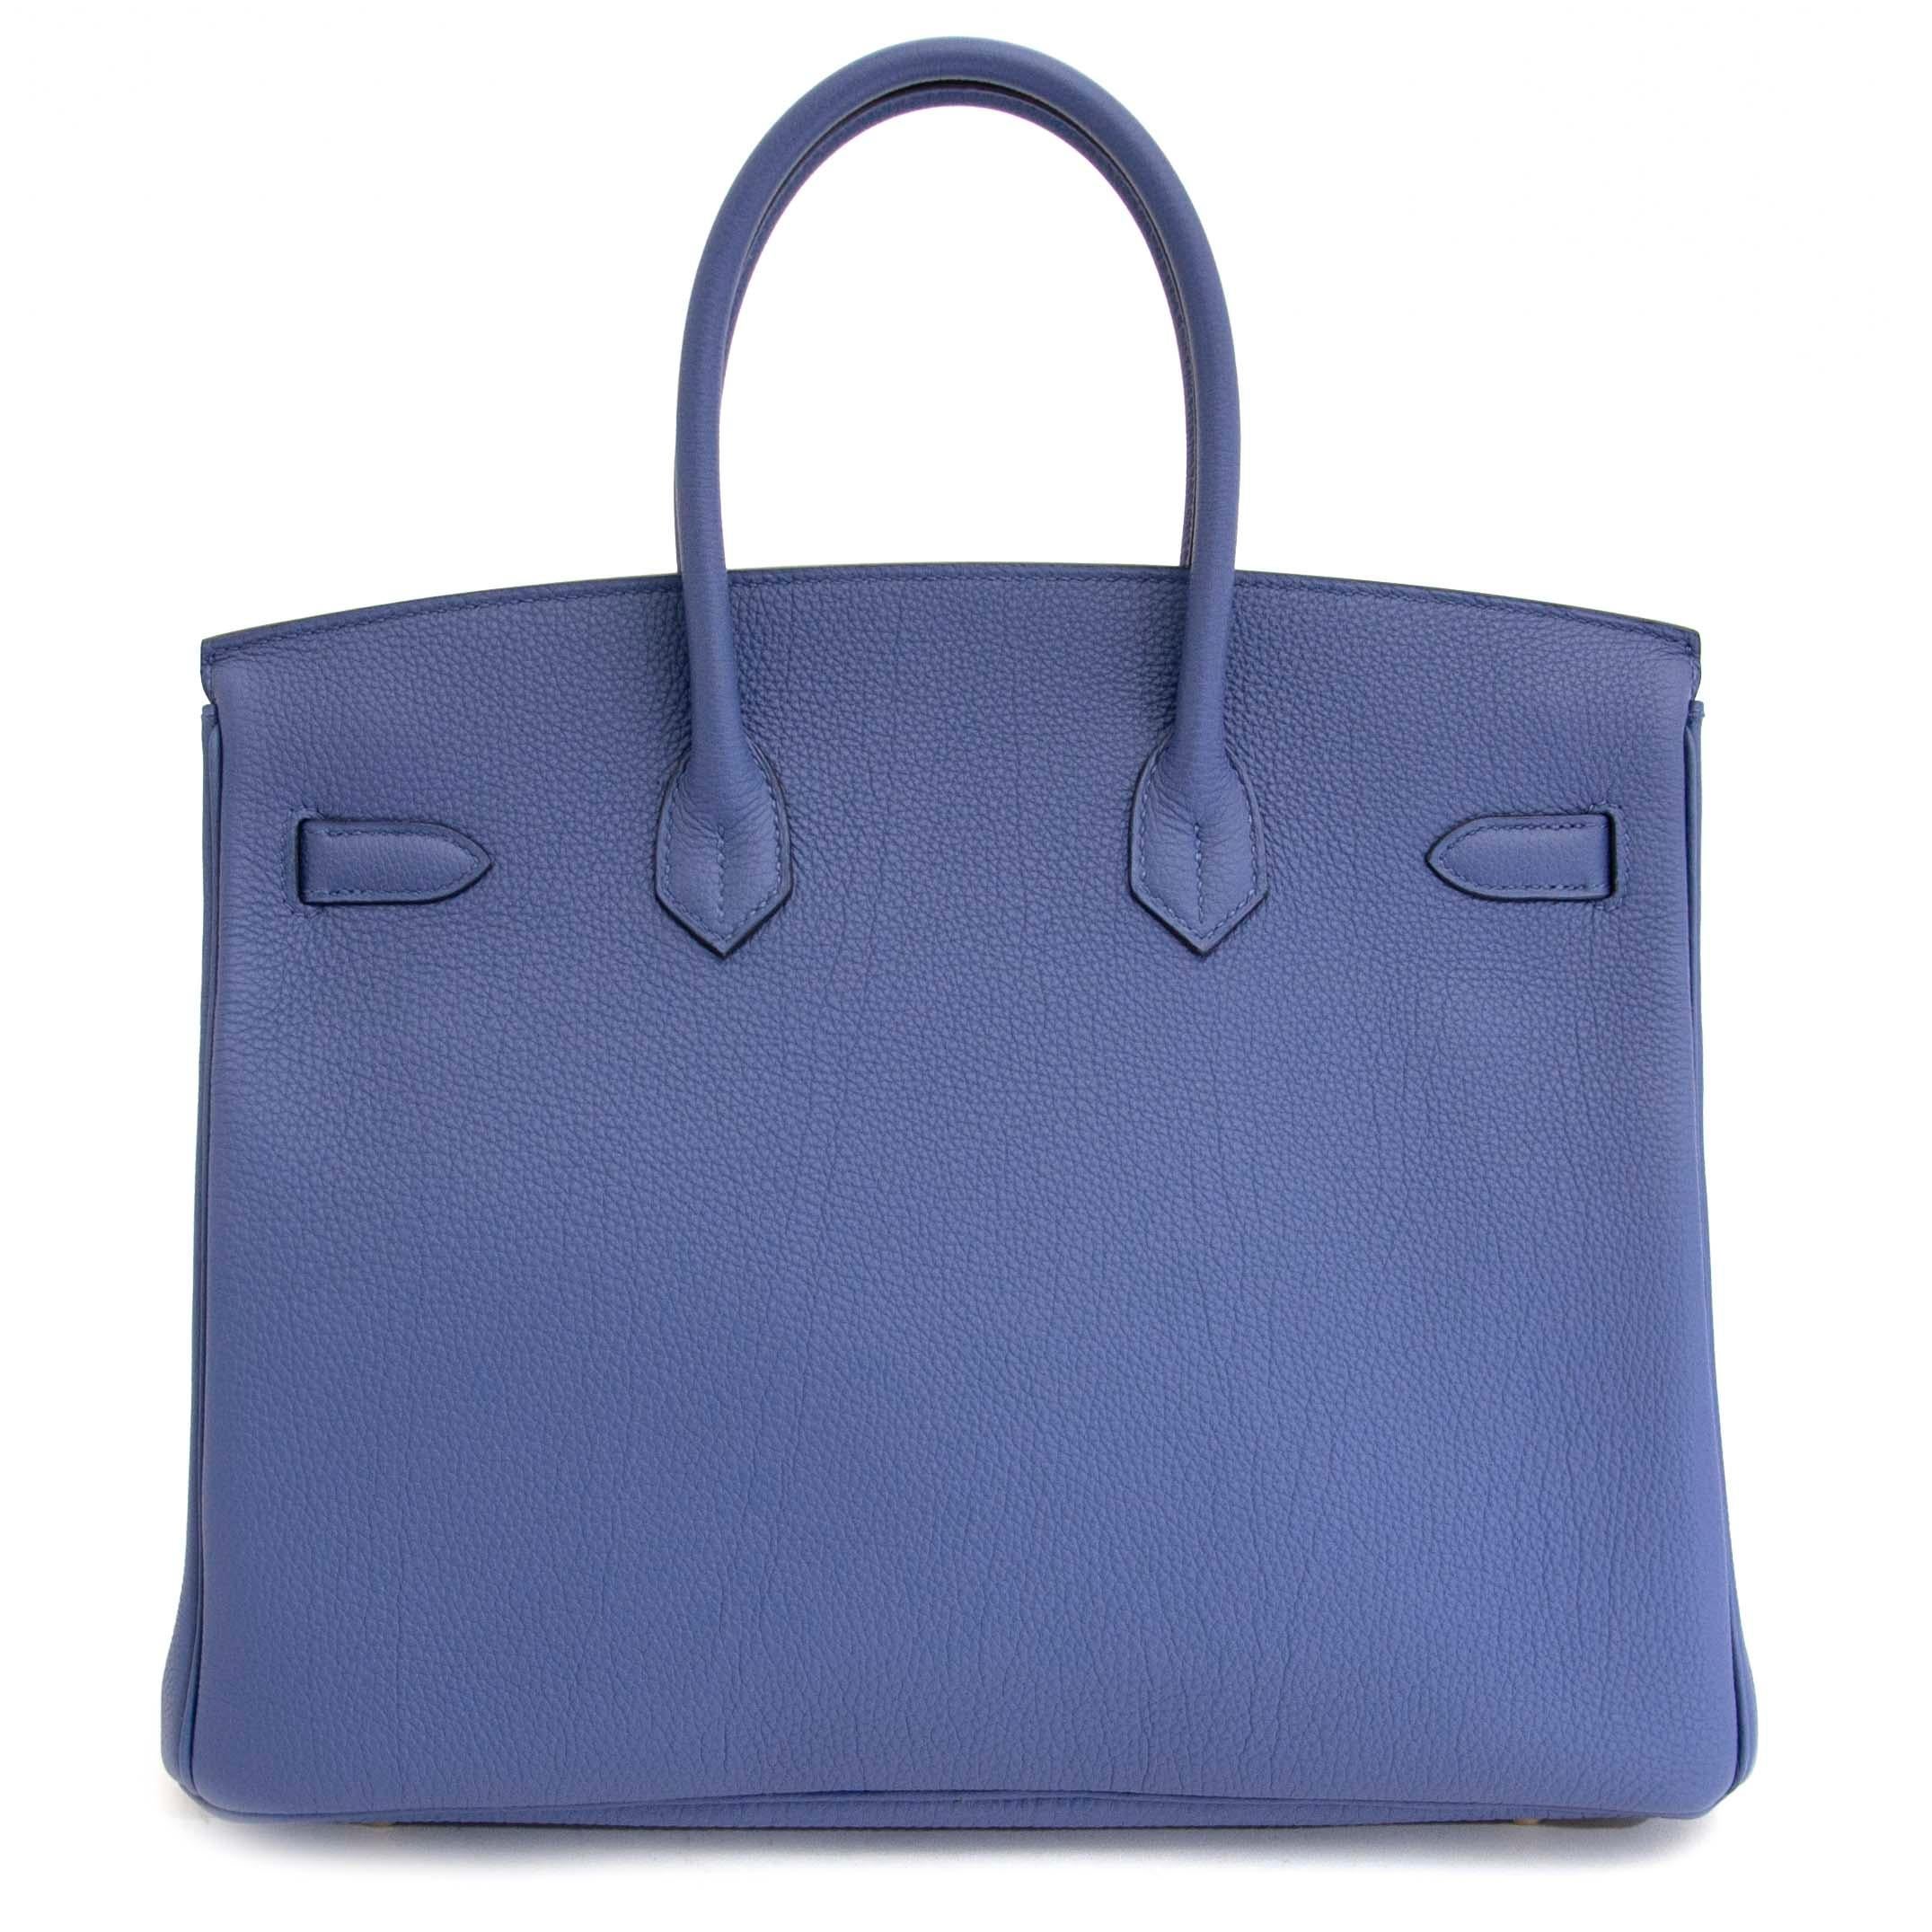 Hermès Birkin 35 Bleu Brighton Epsom GHW

The height of luxury, the epitome of style, ... The world's most wanted bag is now for sale!

This brand new bag in Bleu Brighton comes straight from the store and is crafted out of preciously structured